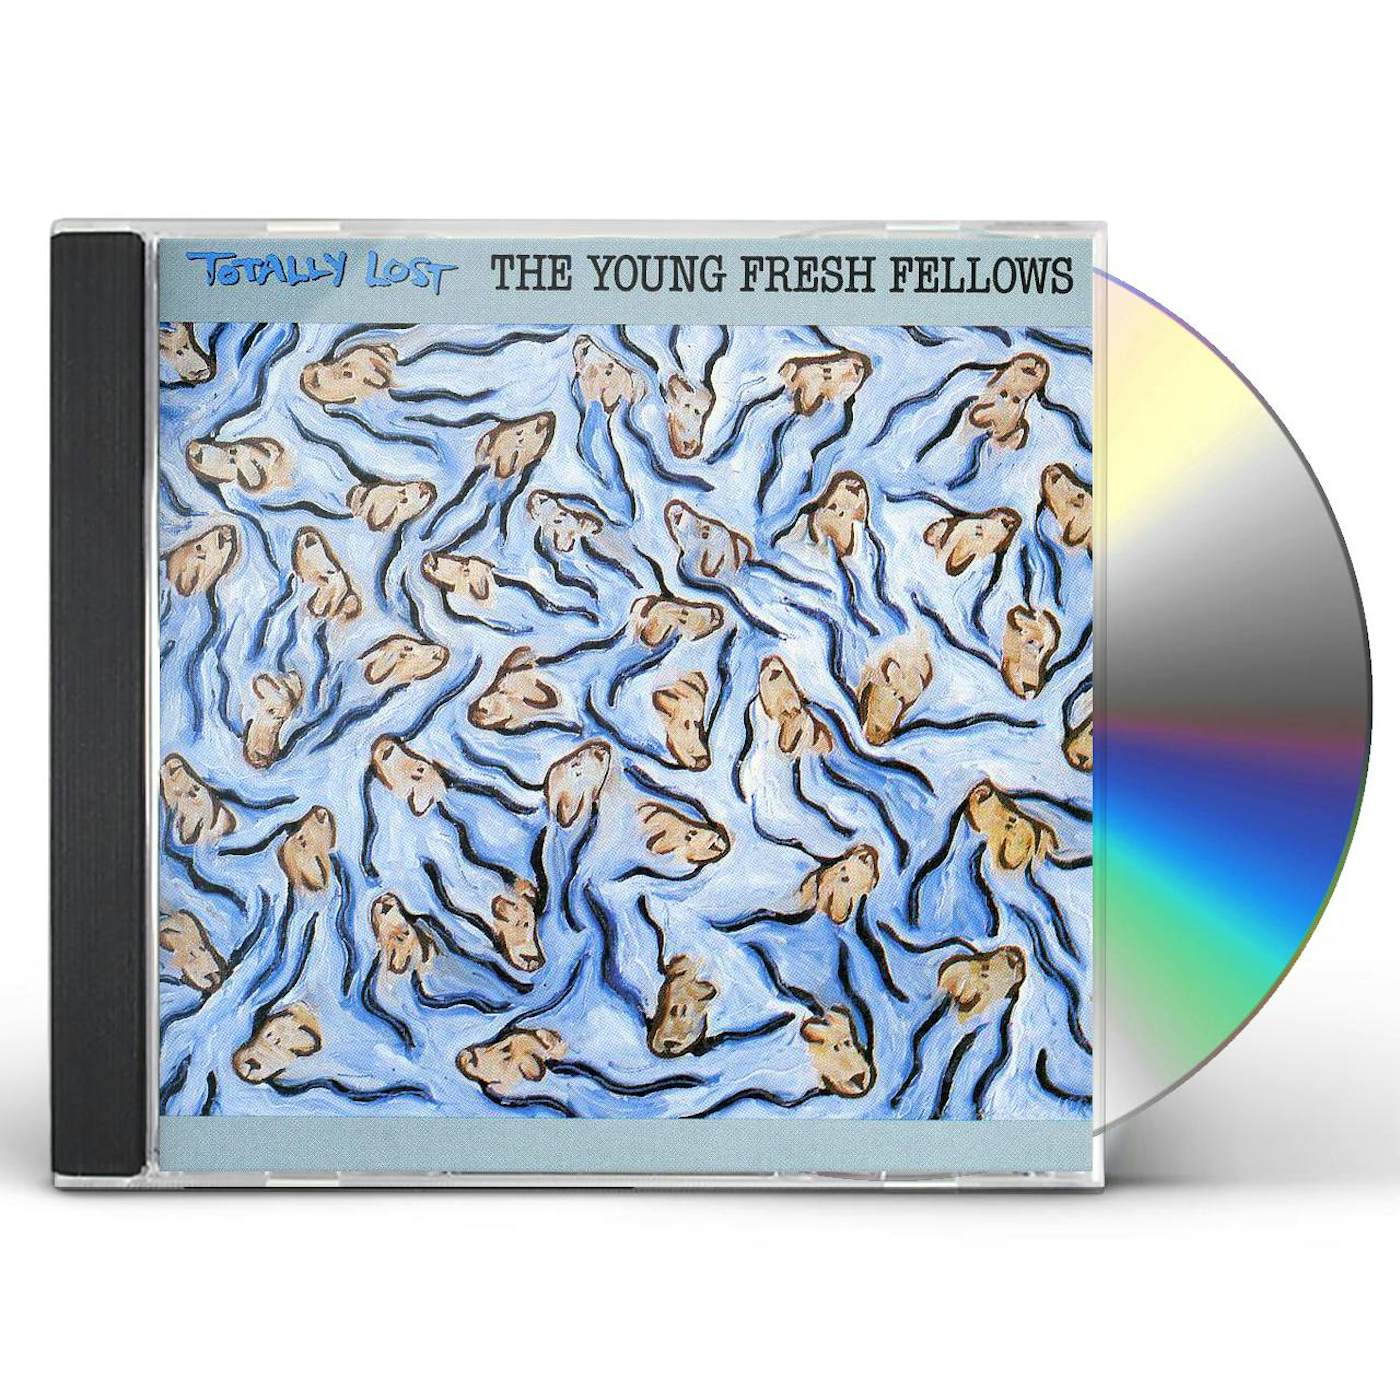 The Young Fresh Fellows TOTALLY LOST CD